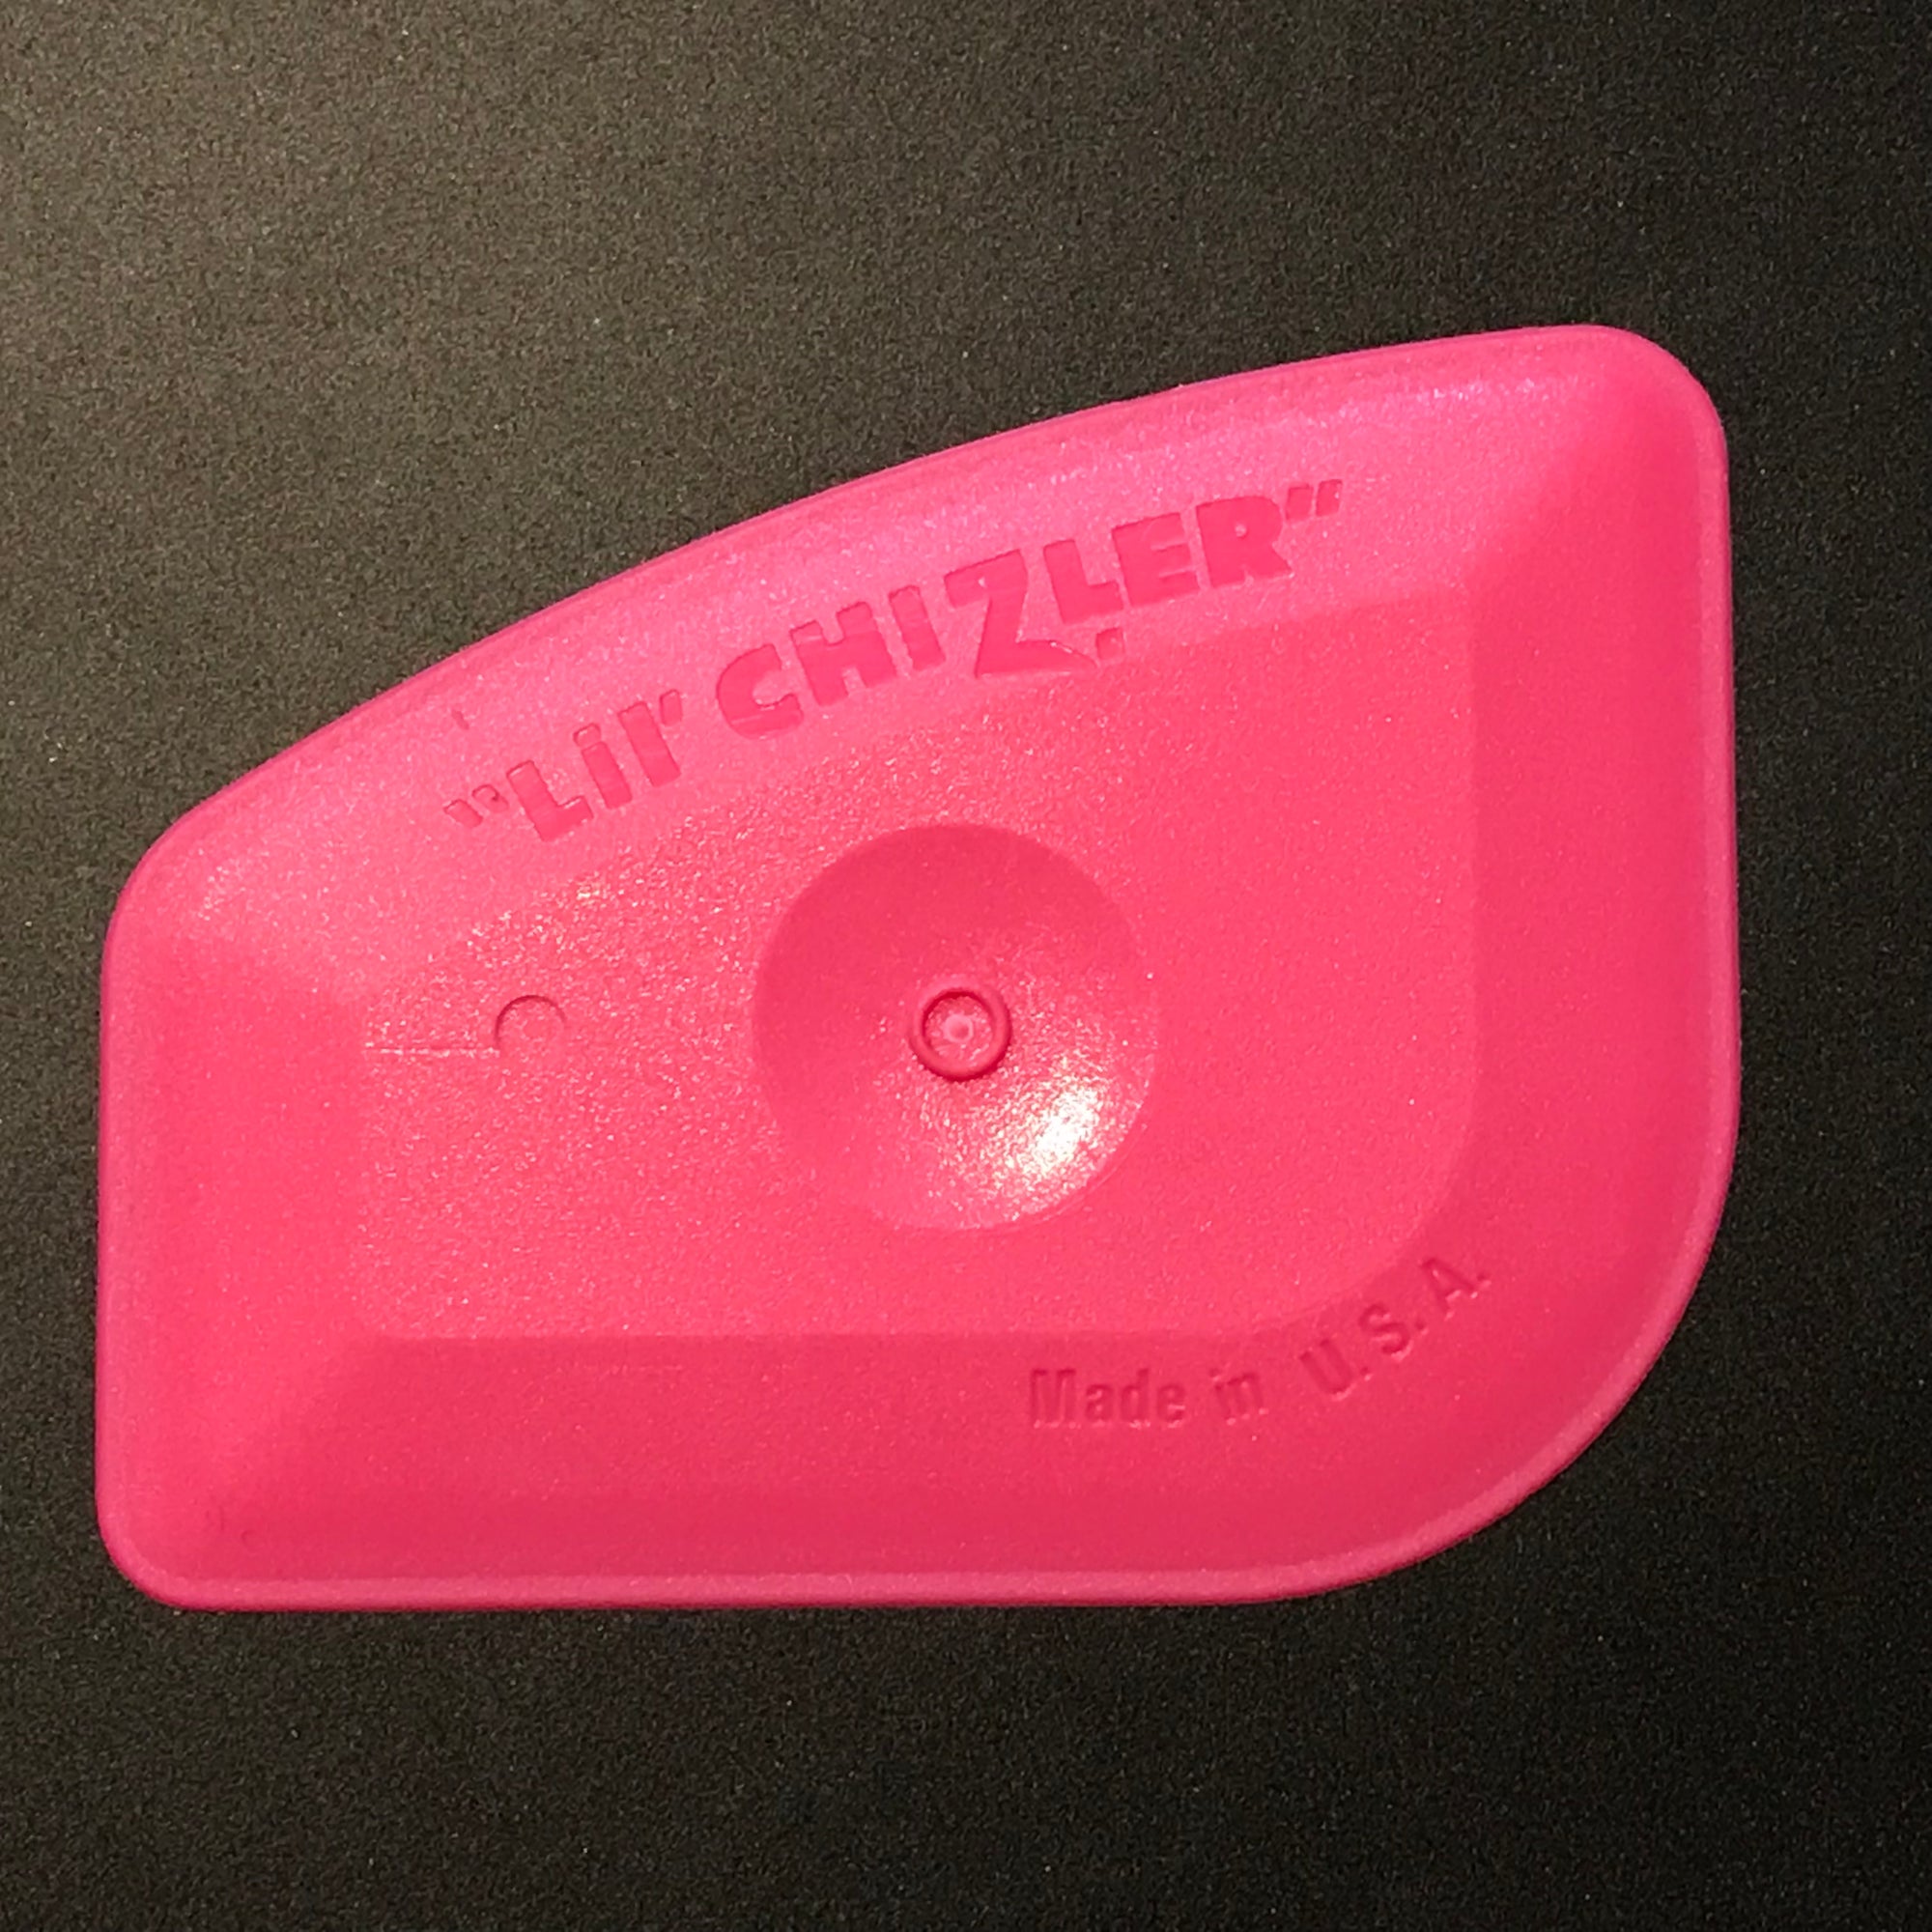 Lil’ Chizler scraper removal and installation tool